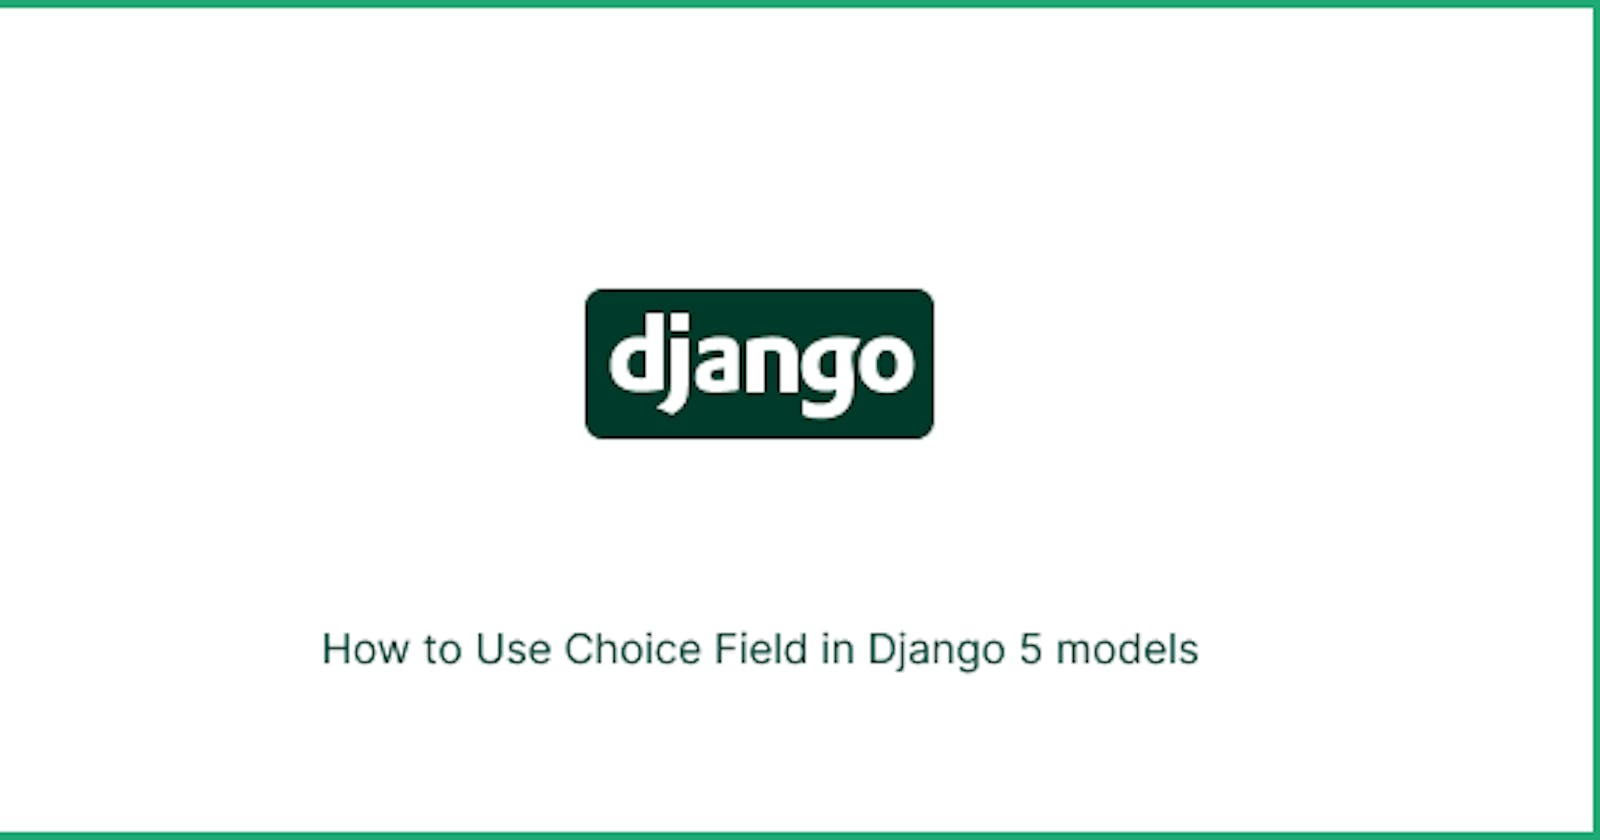 How to Use Choice Field in Django 5 models